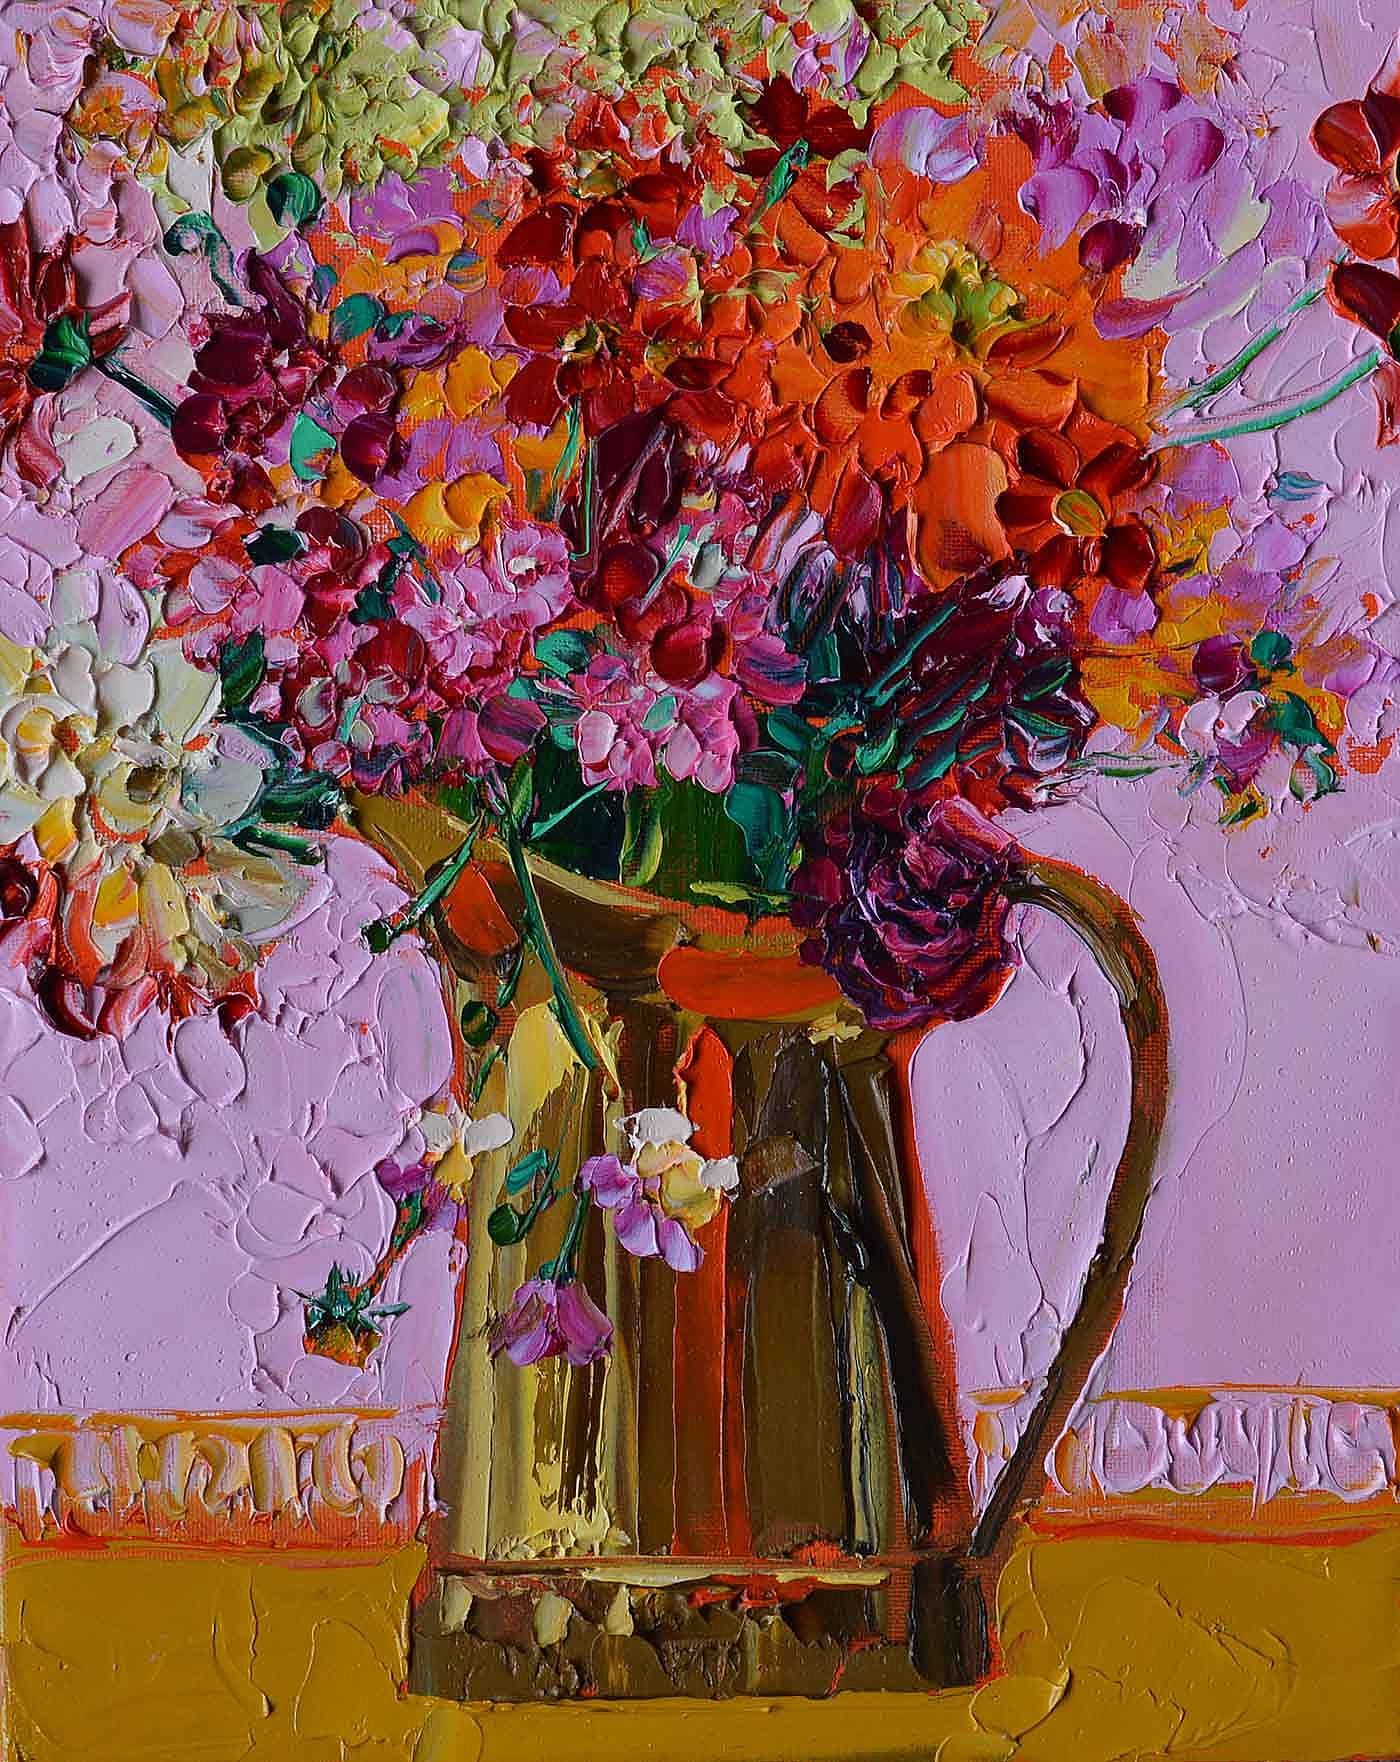 Pots and Posies 1 by Lucy Doyle